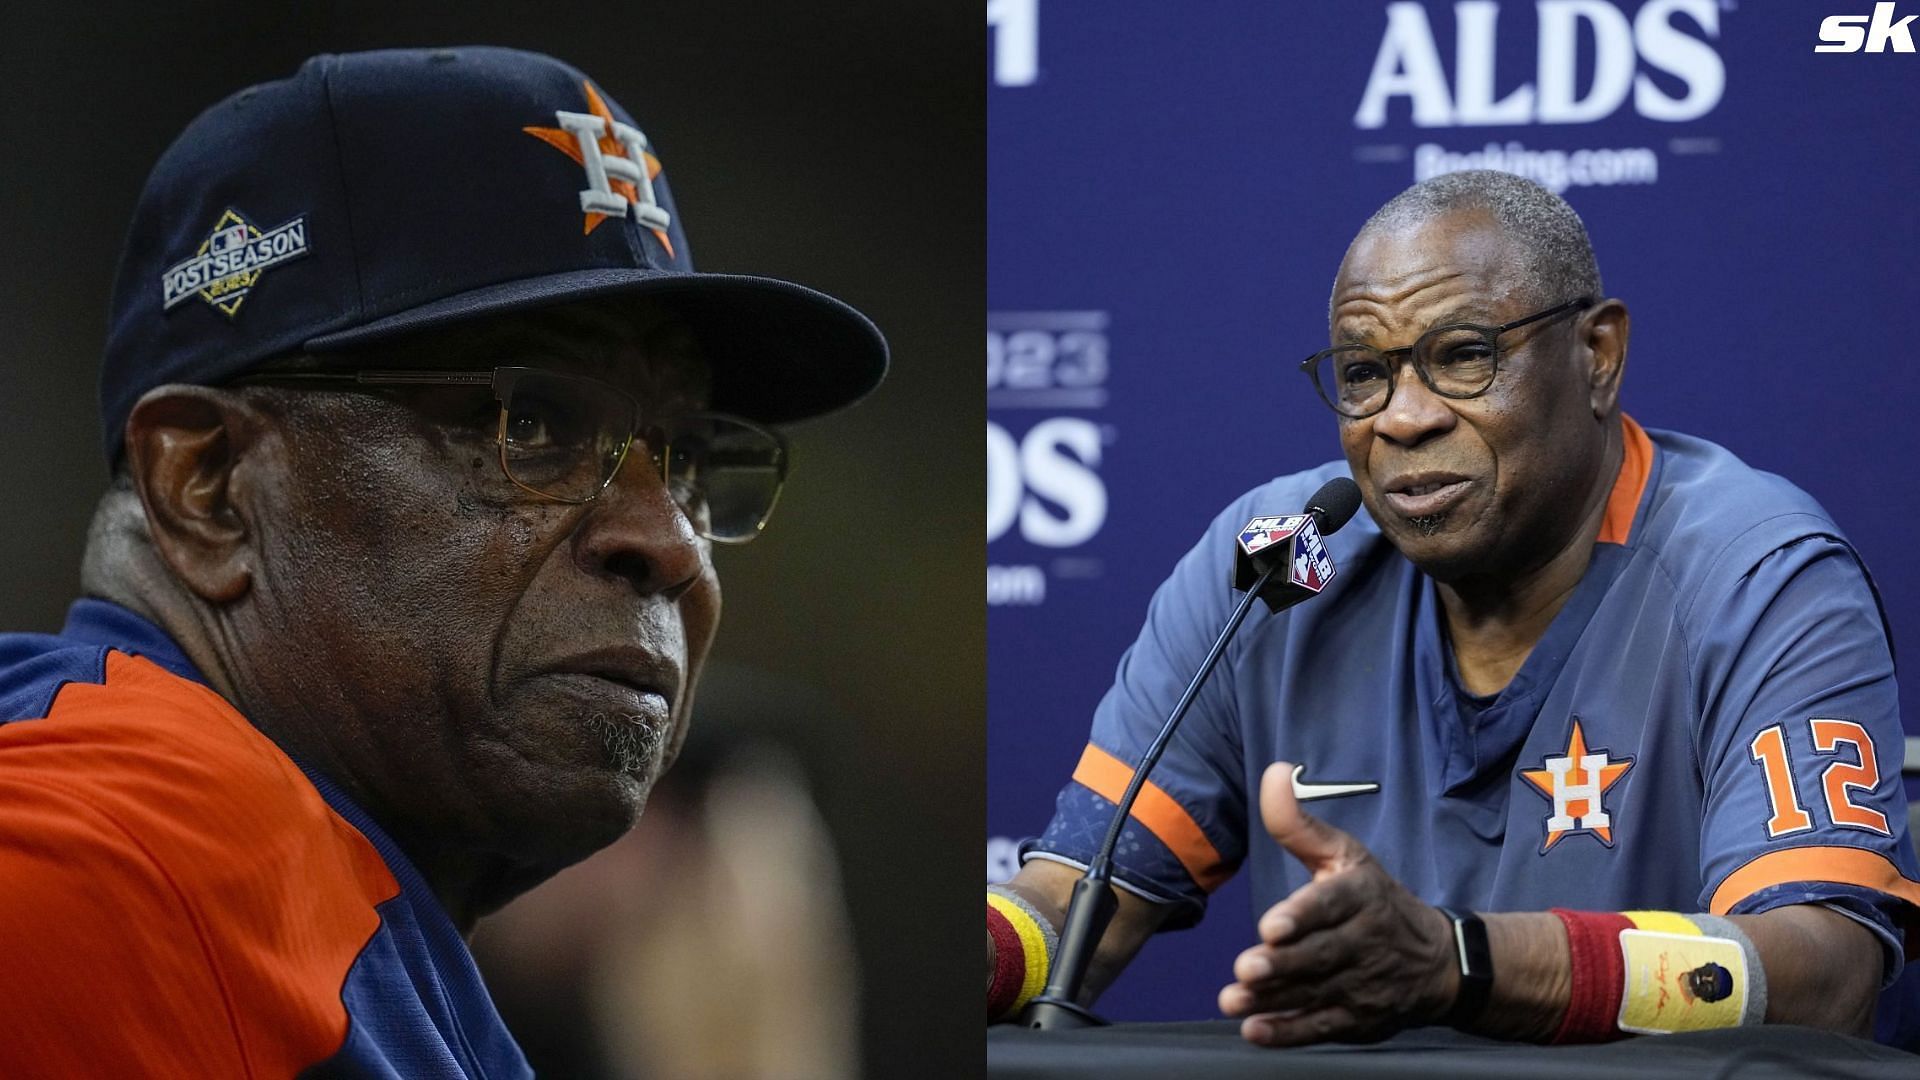 Houston Astros manager Dusty Baker Jr. watches on during their game against the Minnesota Twins